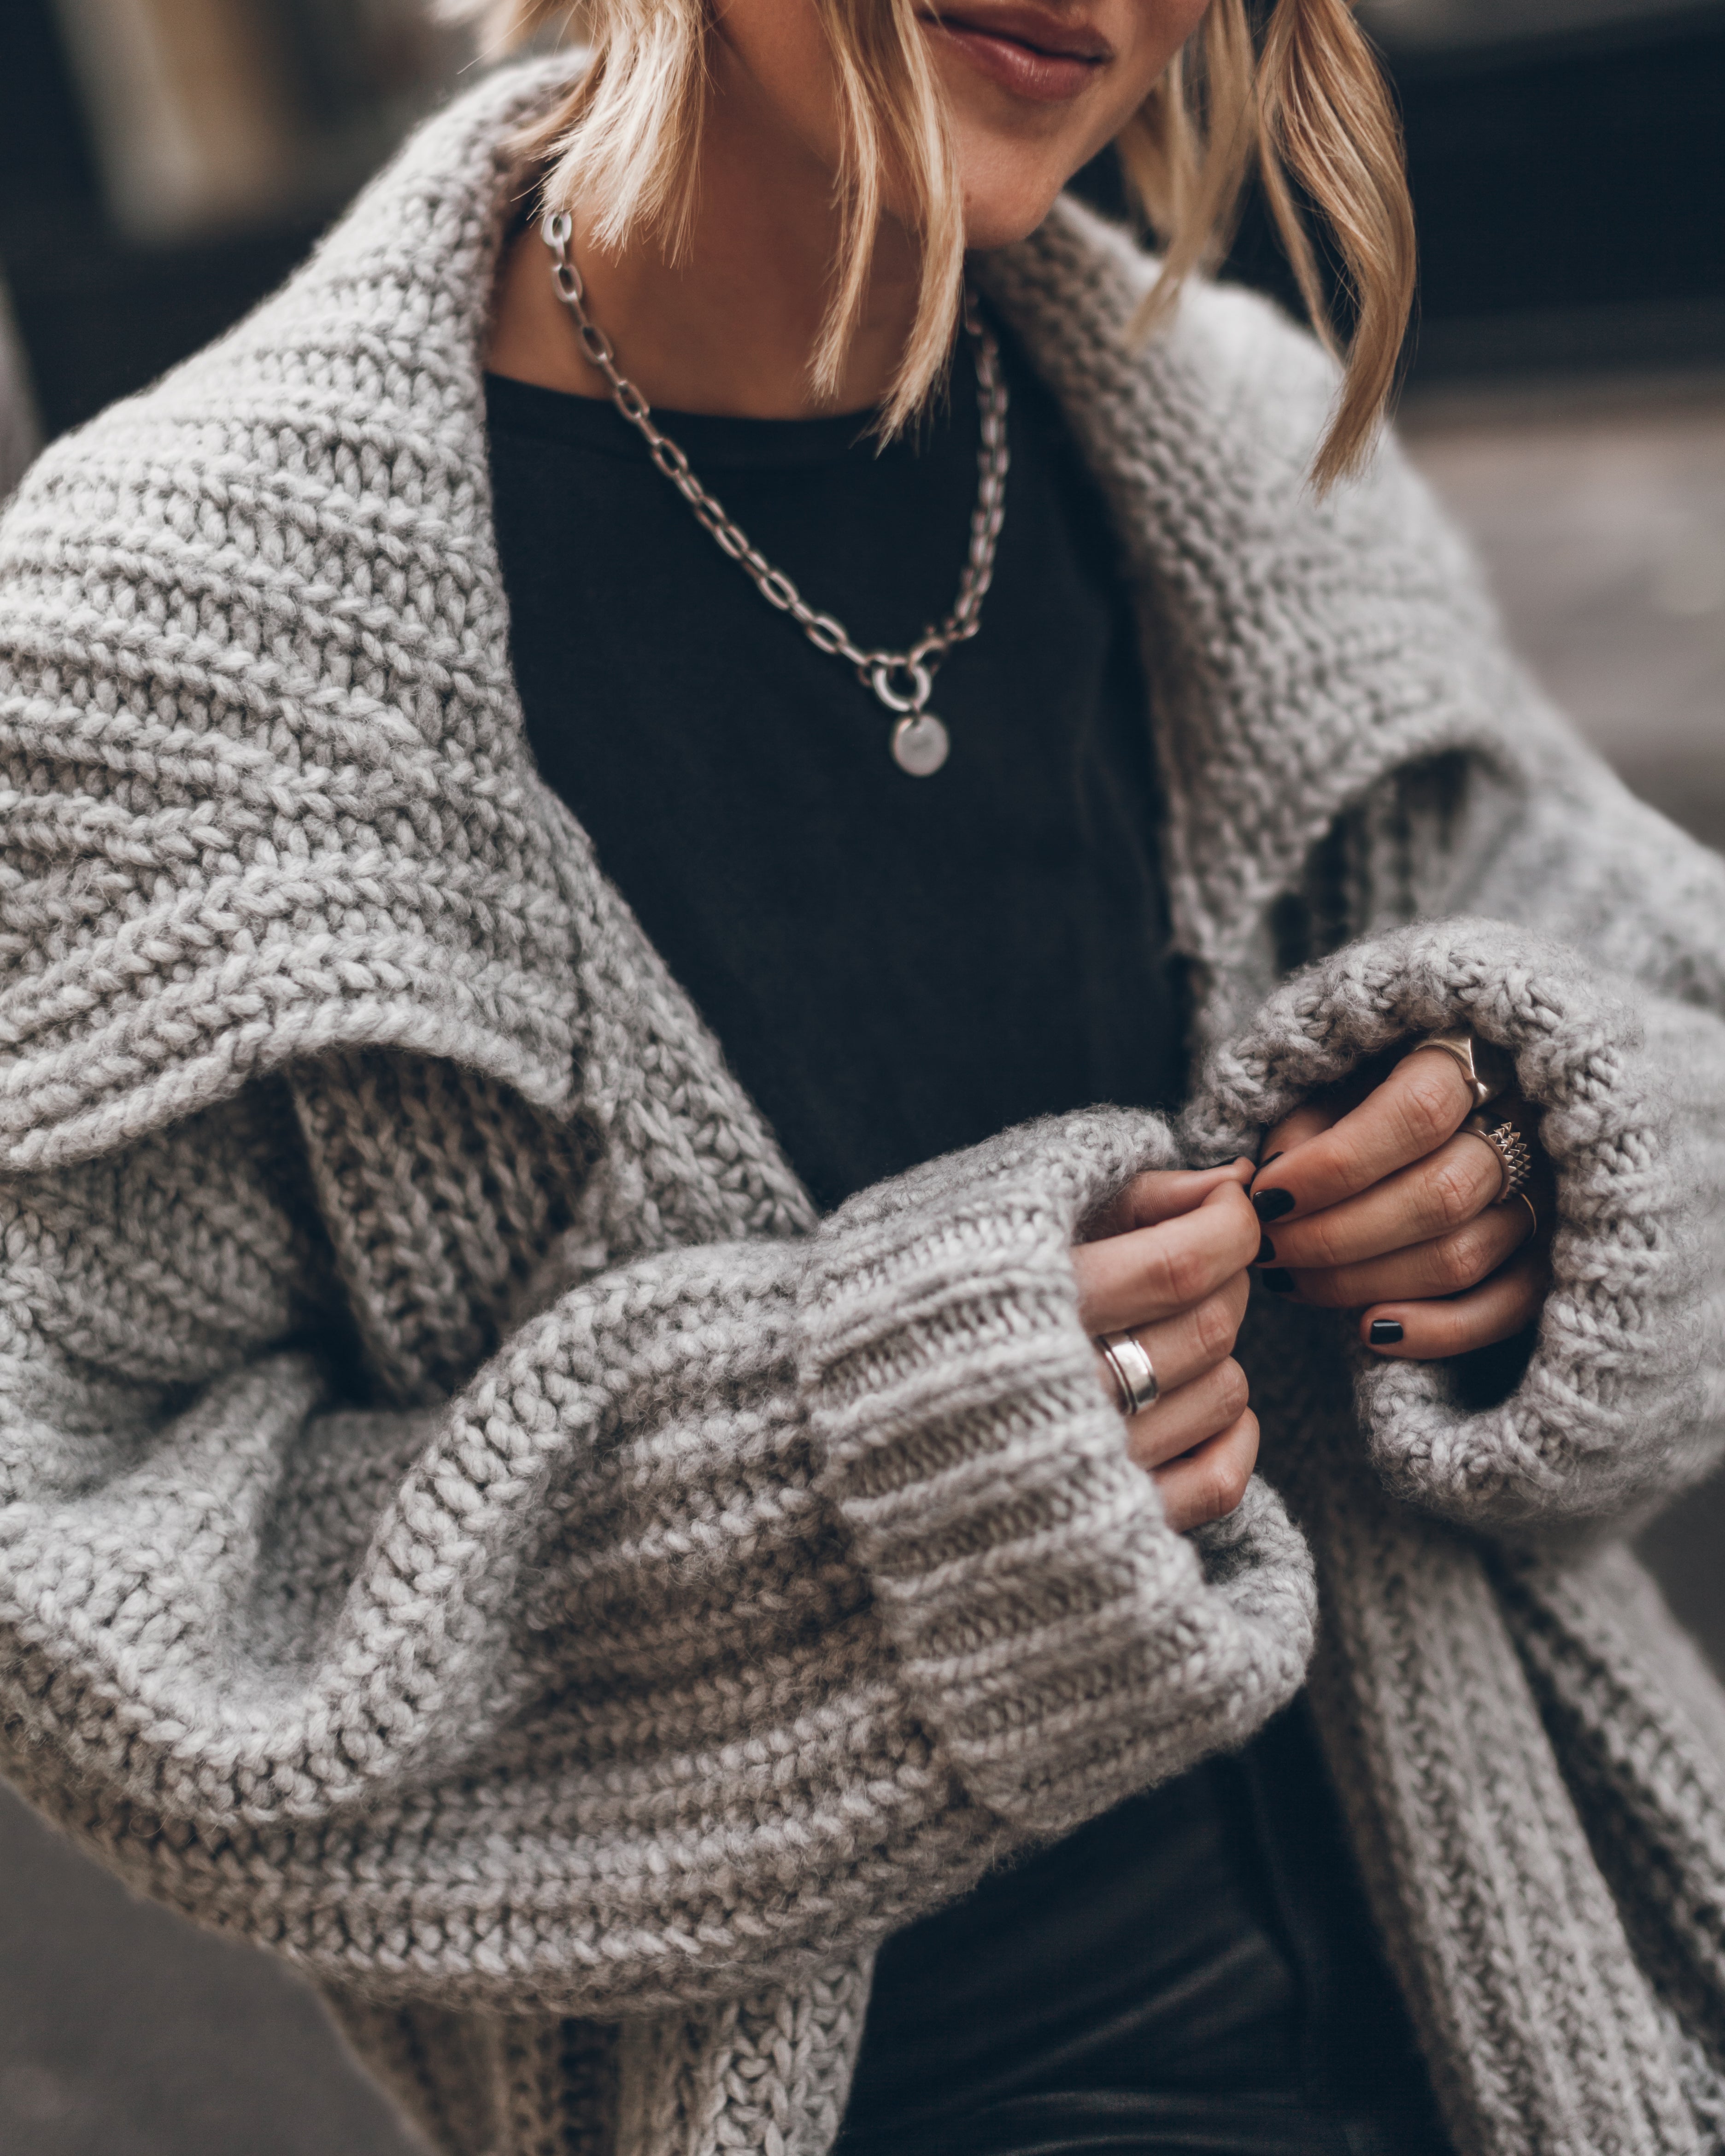 The Light Long Knitted Cardigan